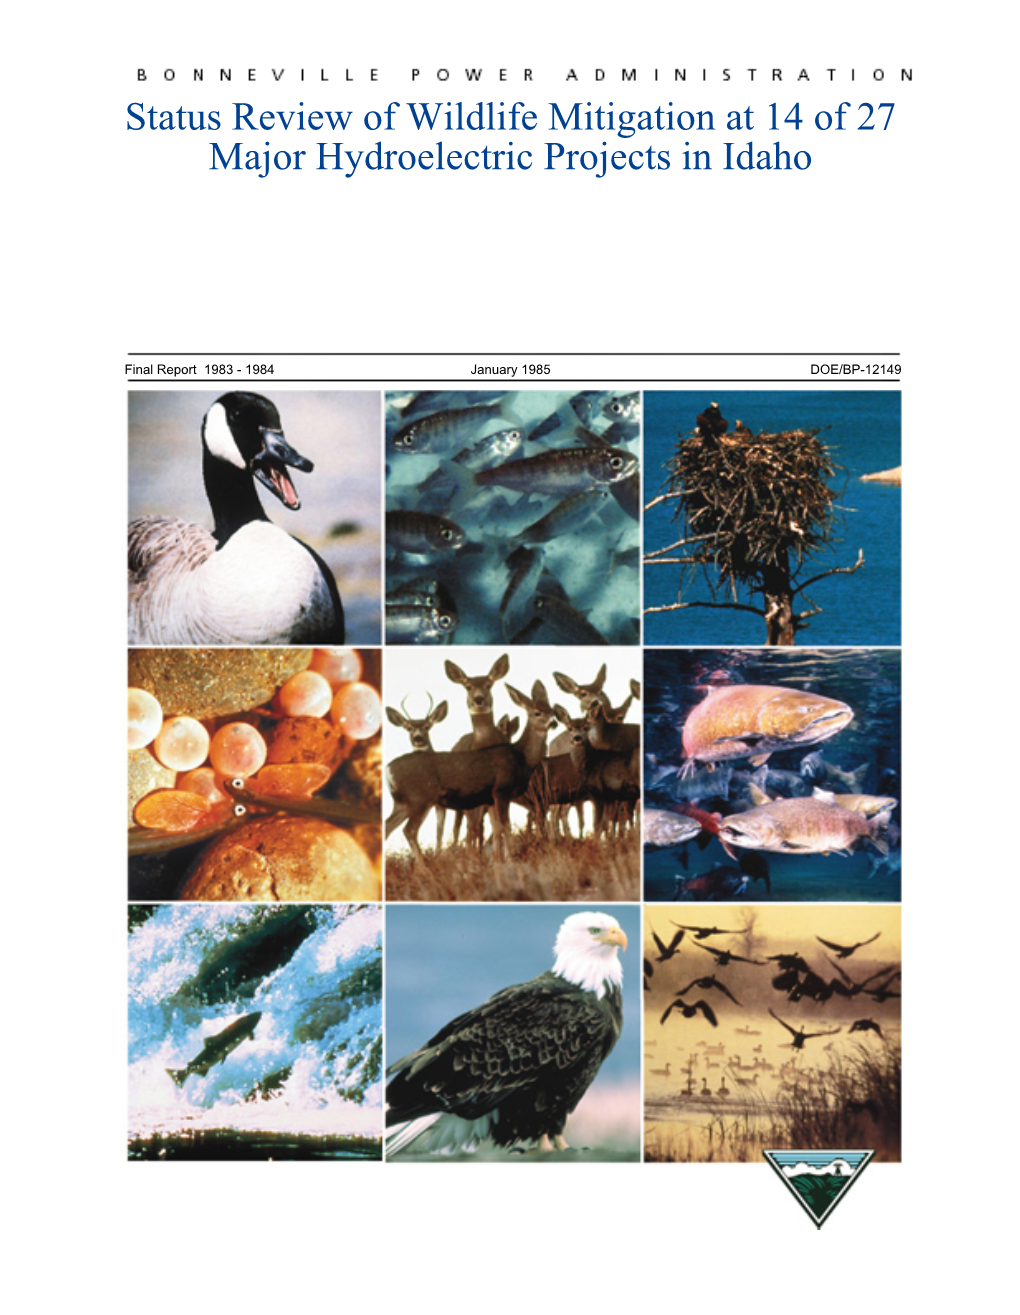 Status Review of Wildlife Mitigation at 14 of 27 Major Hydroelectric Projects in Idaho